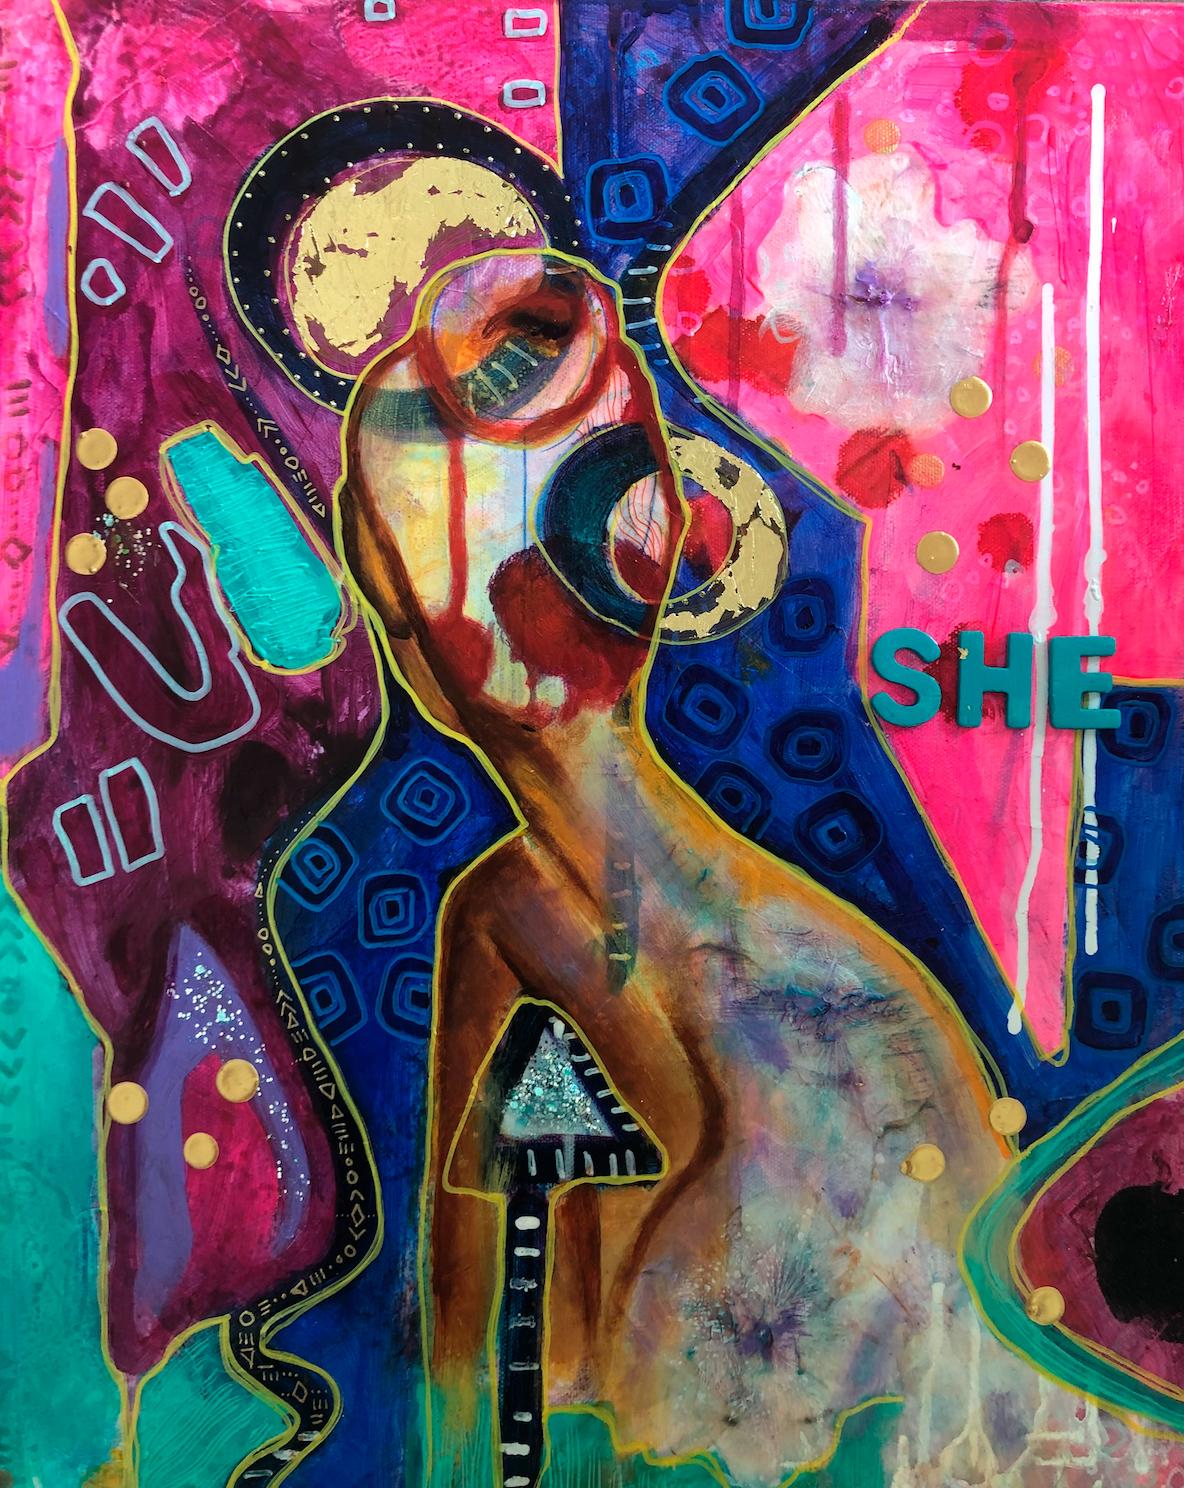 SHE + ME = HAPPY by Nicole Collie - Painting by Unknown